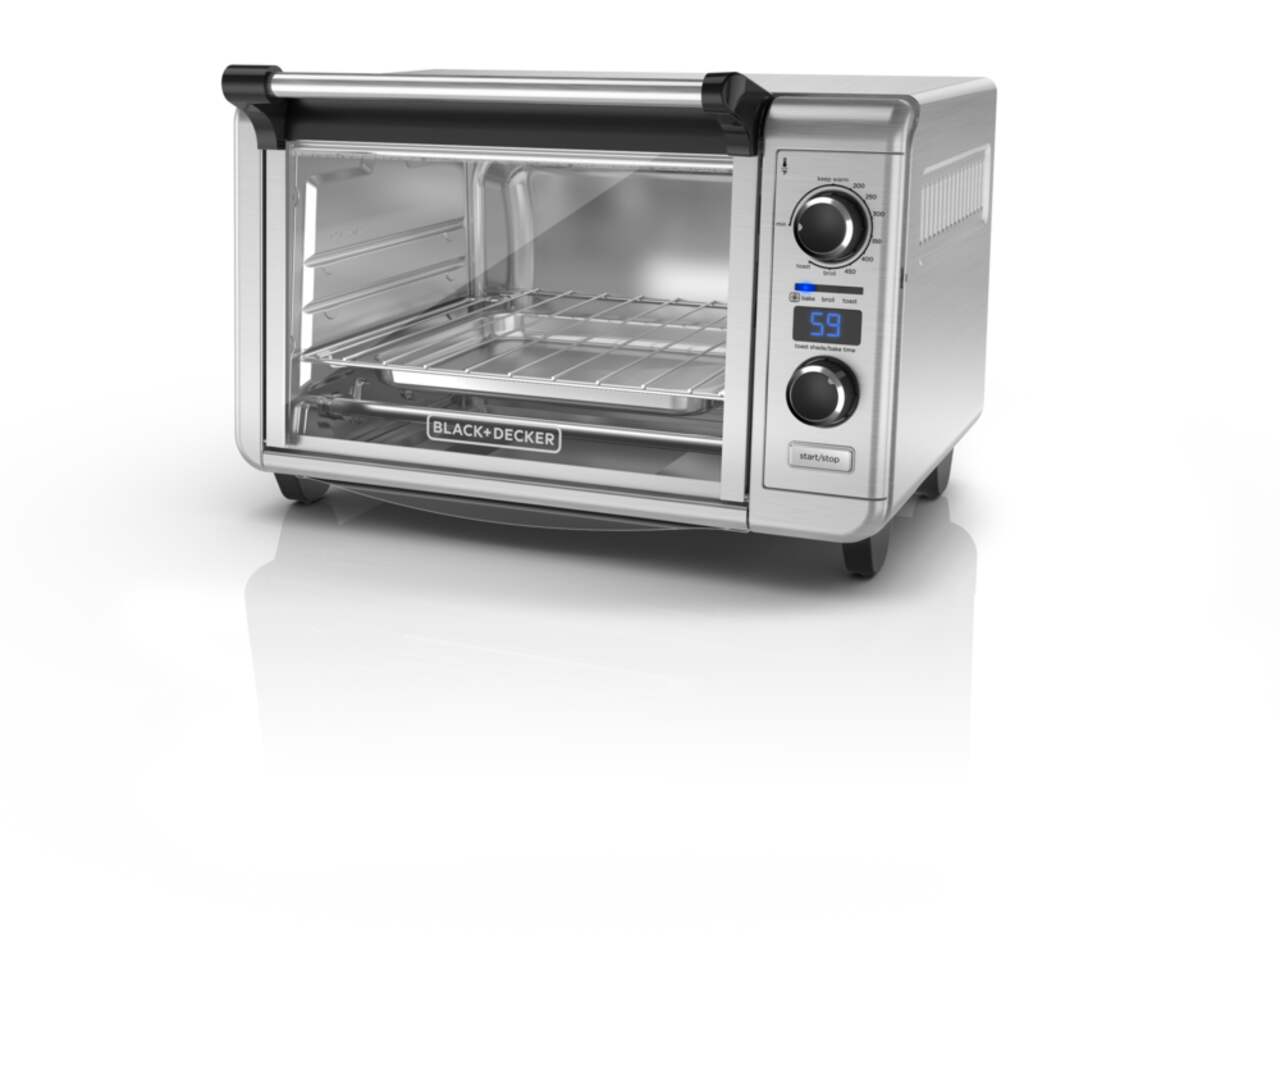 https://media-www.canadiantire.ca/product/living/kitchen/kitchen-appliances/0439547/black-and-decker-digital-convection-toaster-oven-9987cfcb-96a2-416b-be85-71839f739a2d.png?imdensity=1&imwidth=640&impolicy=mZoom